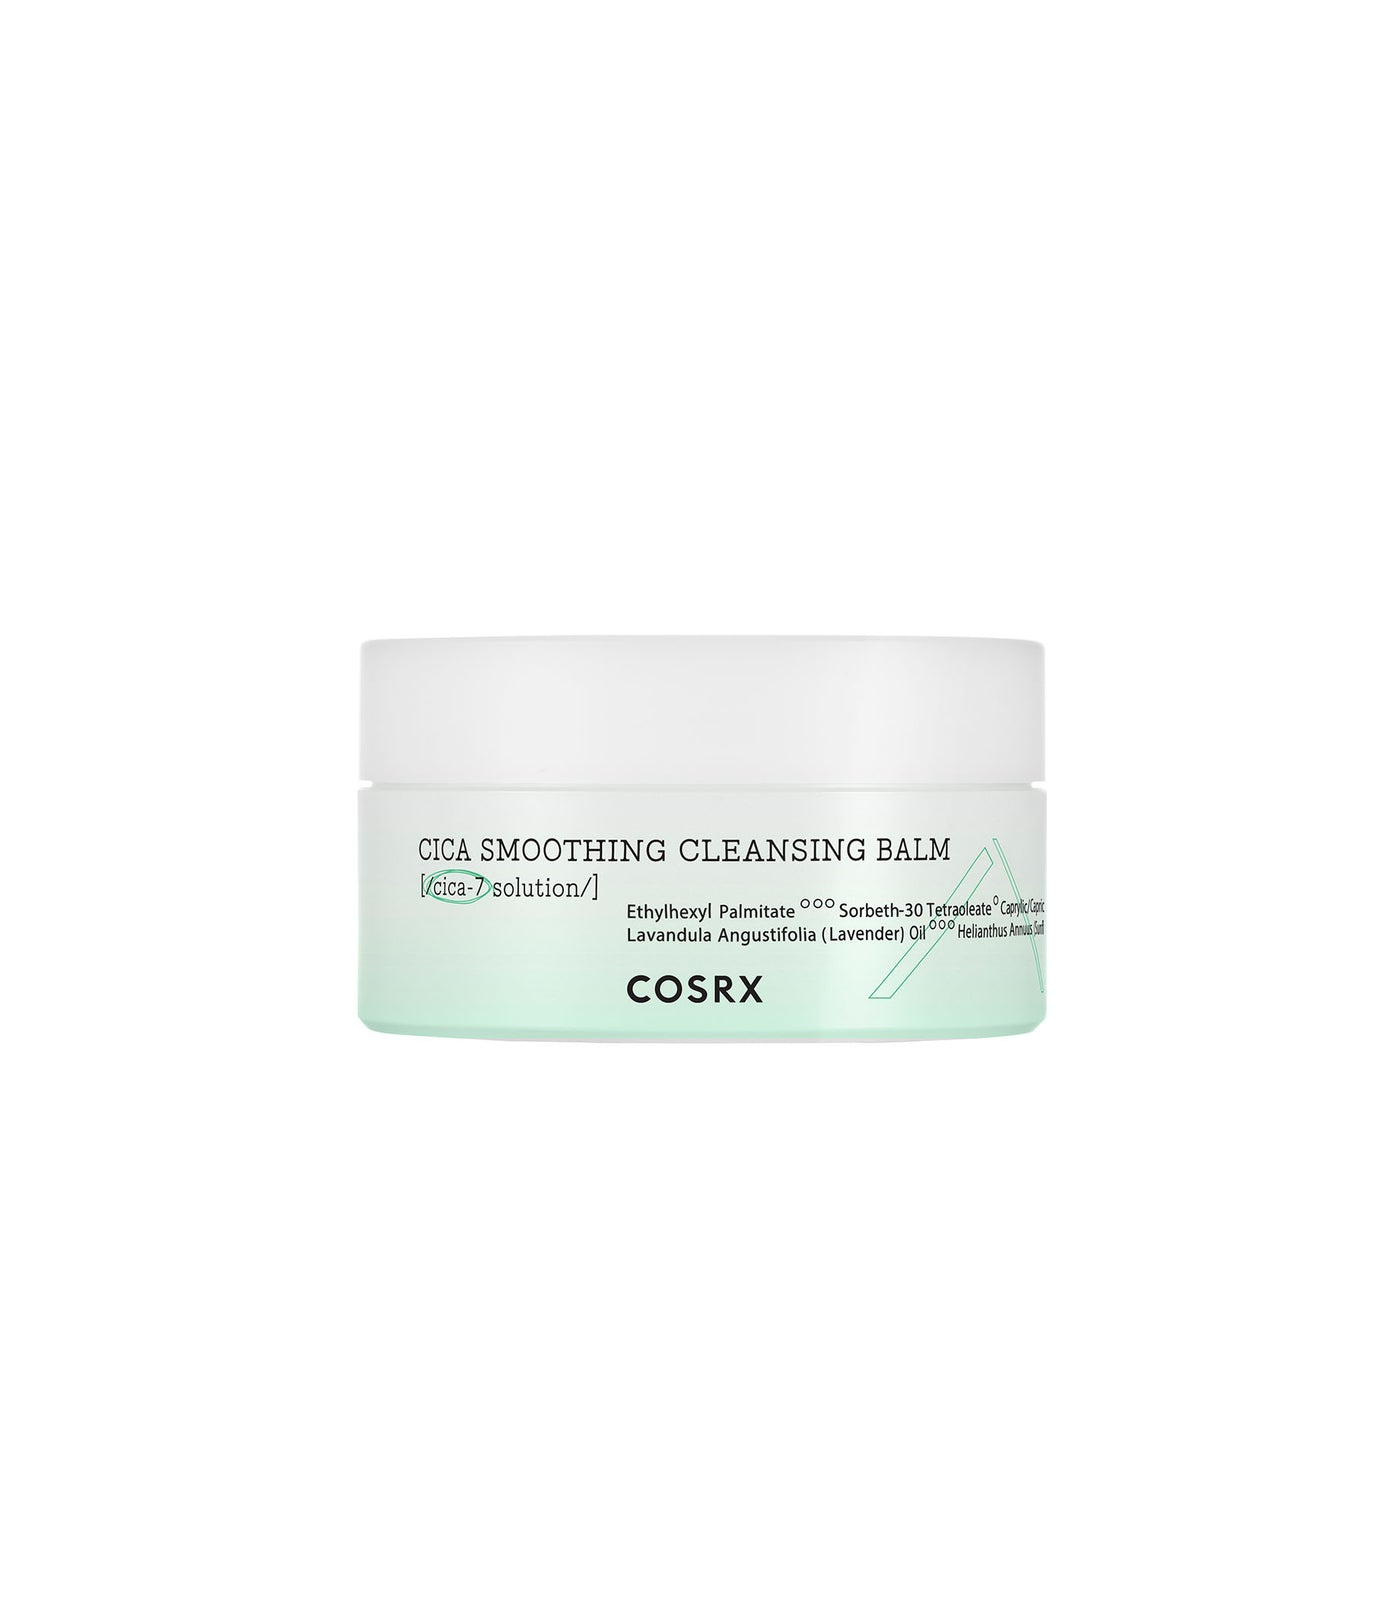 Cosrx Pure Fit Cica Smoothing Cleansing Balm